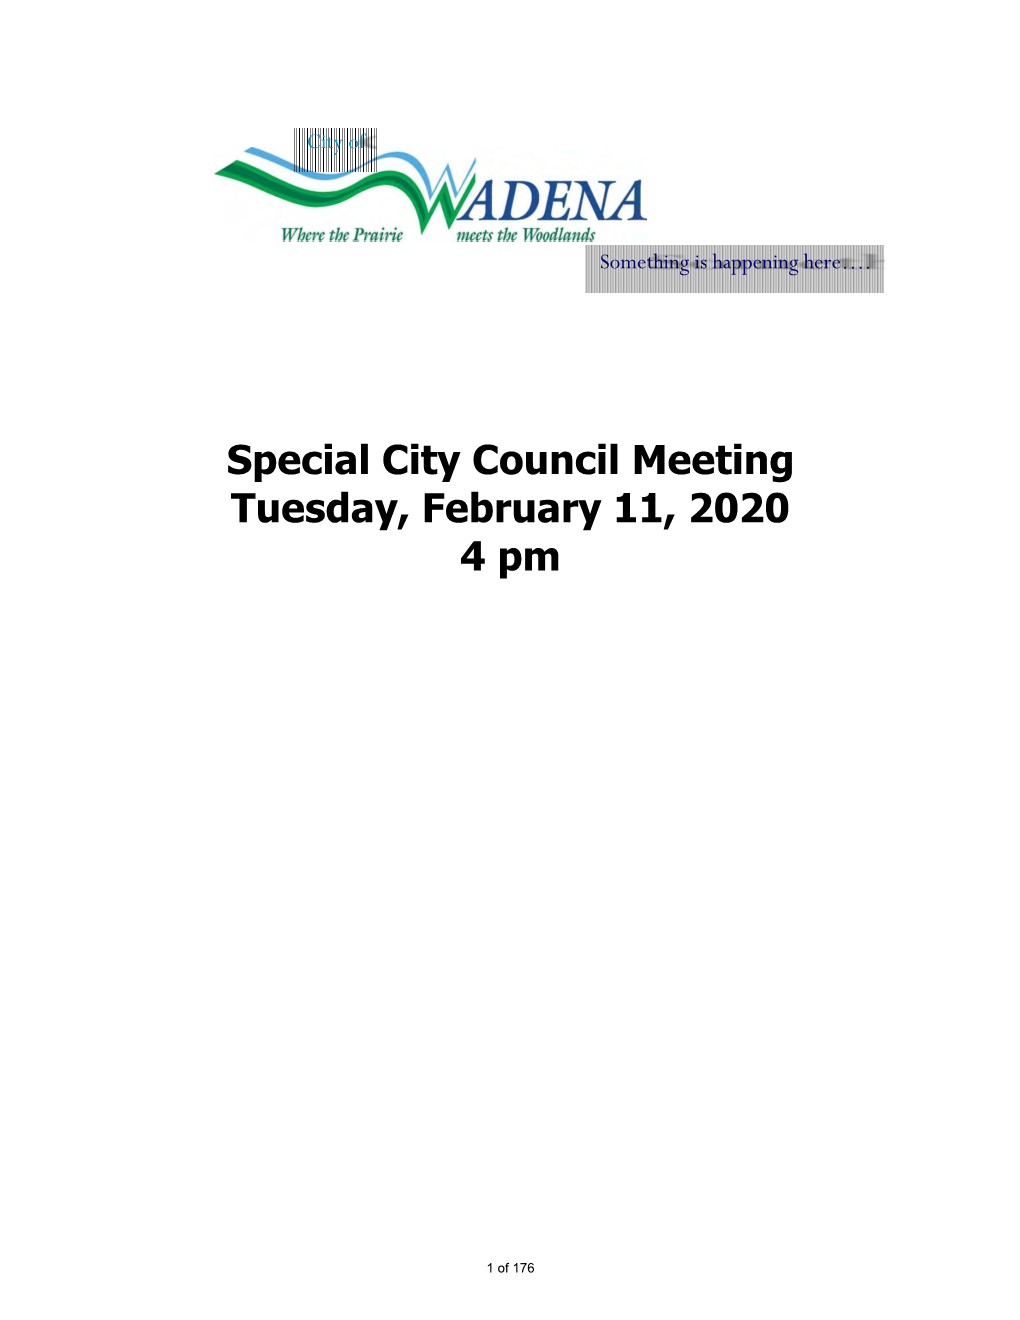 Special City Council Meeting Tuesday, February 11, 2020 4 Pm